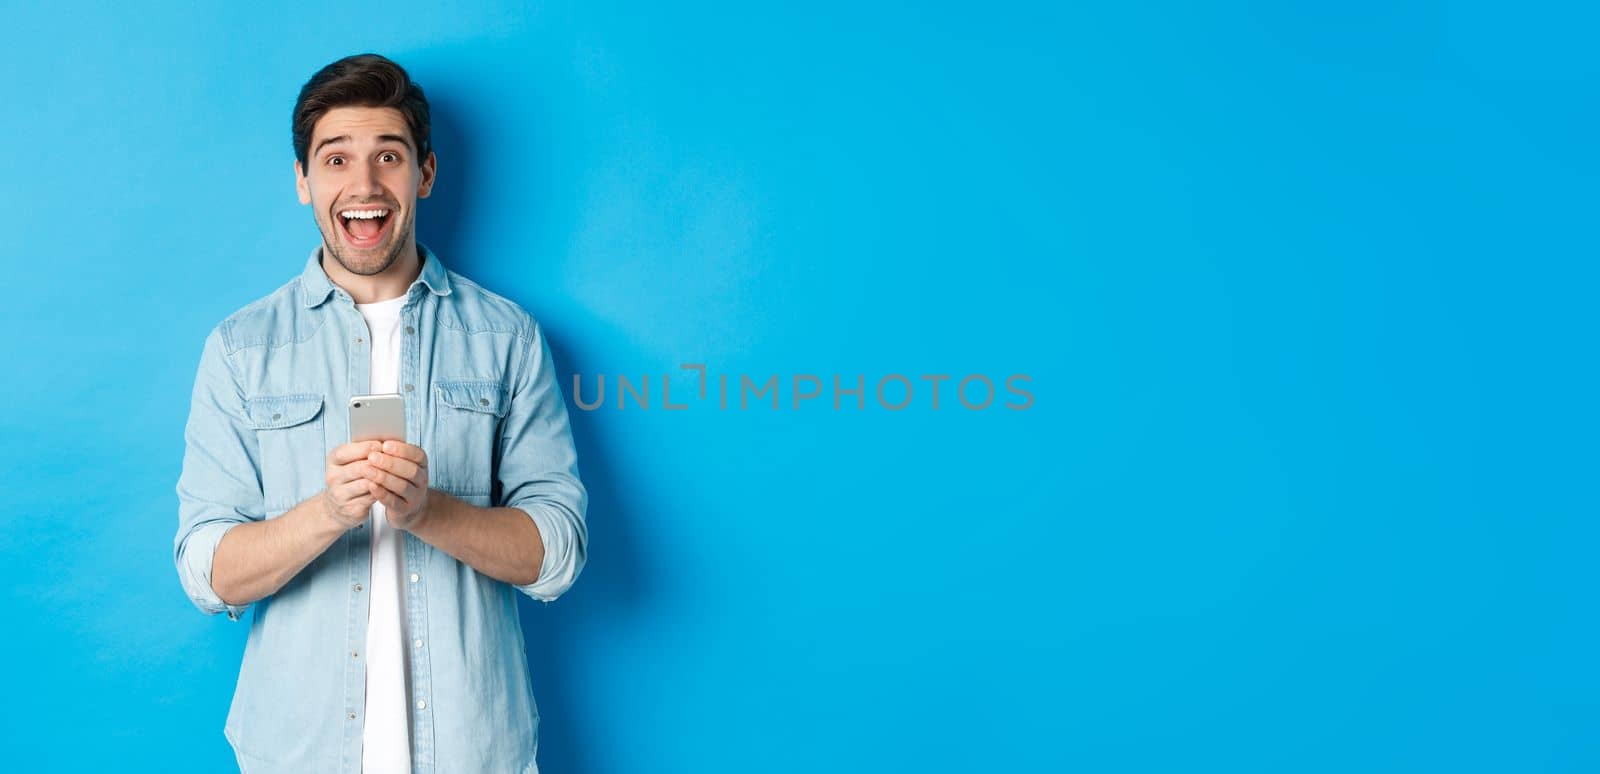 Surprised and happy man winning something online, holding smartphone and rejoicing, standing against blue background by Benzoix